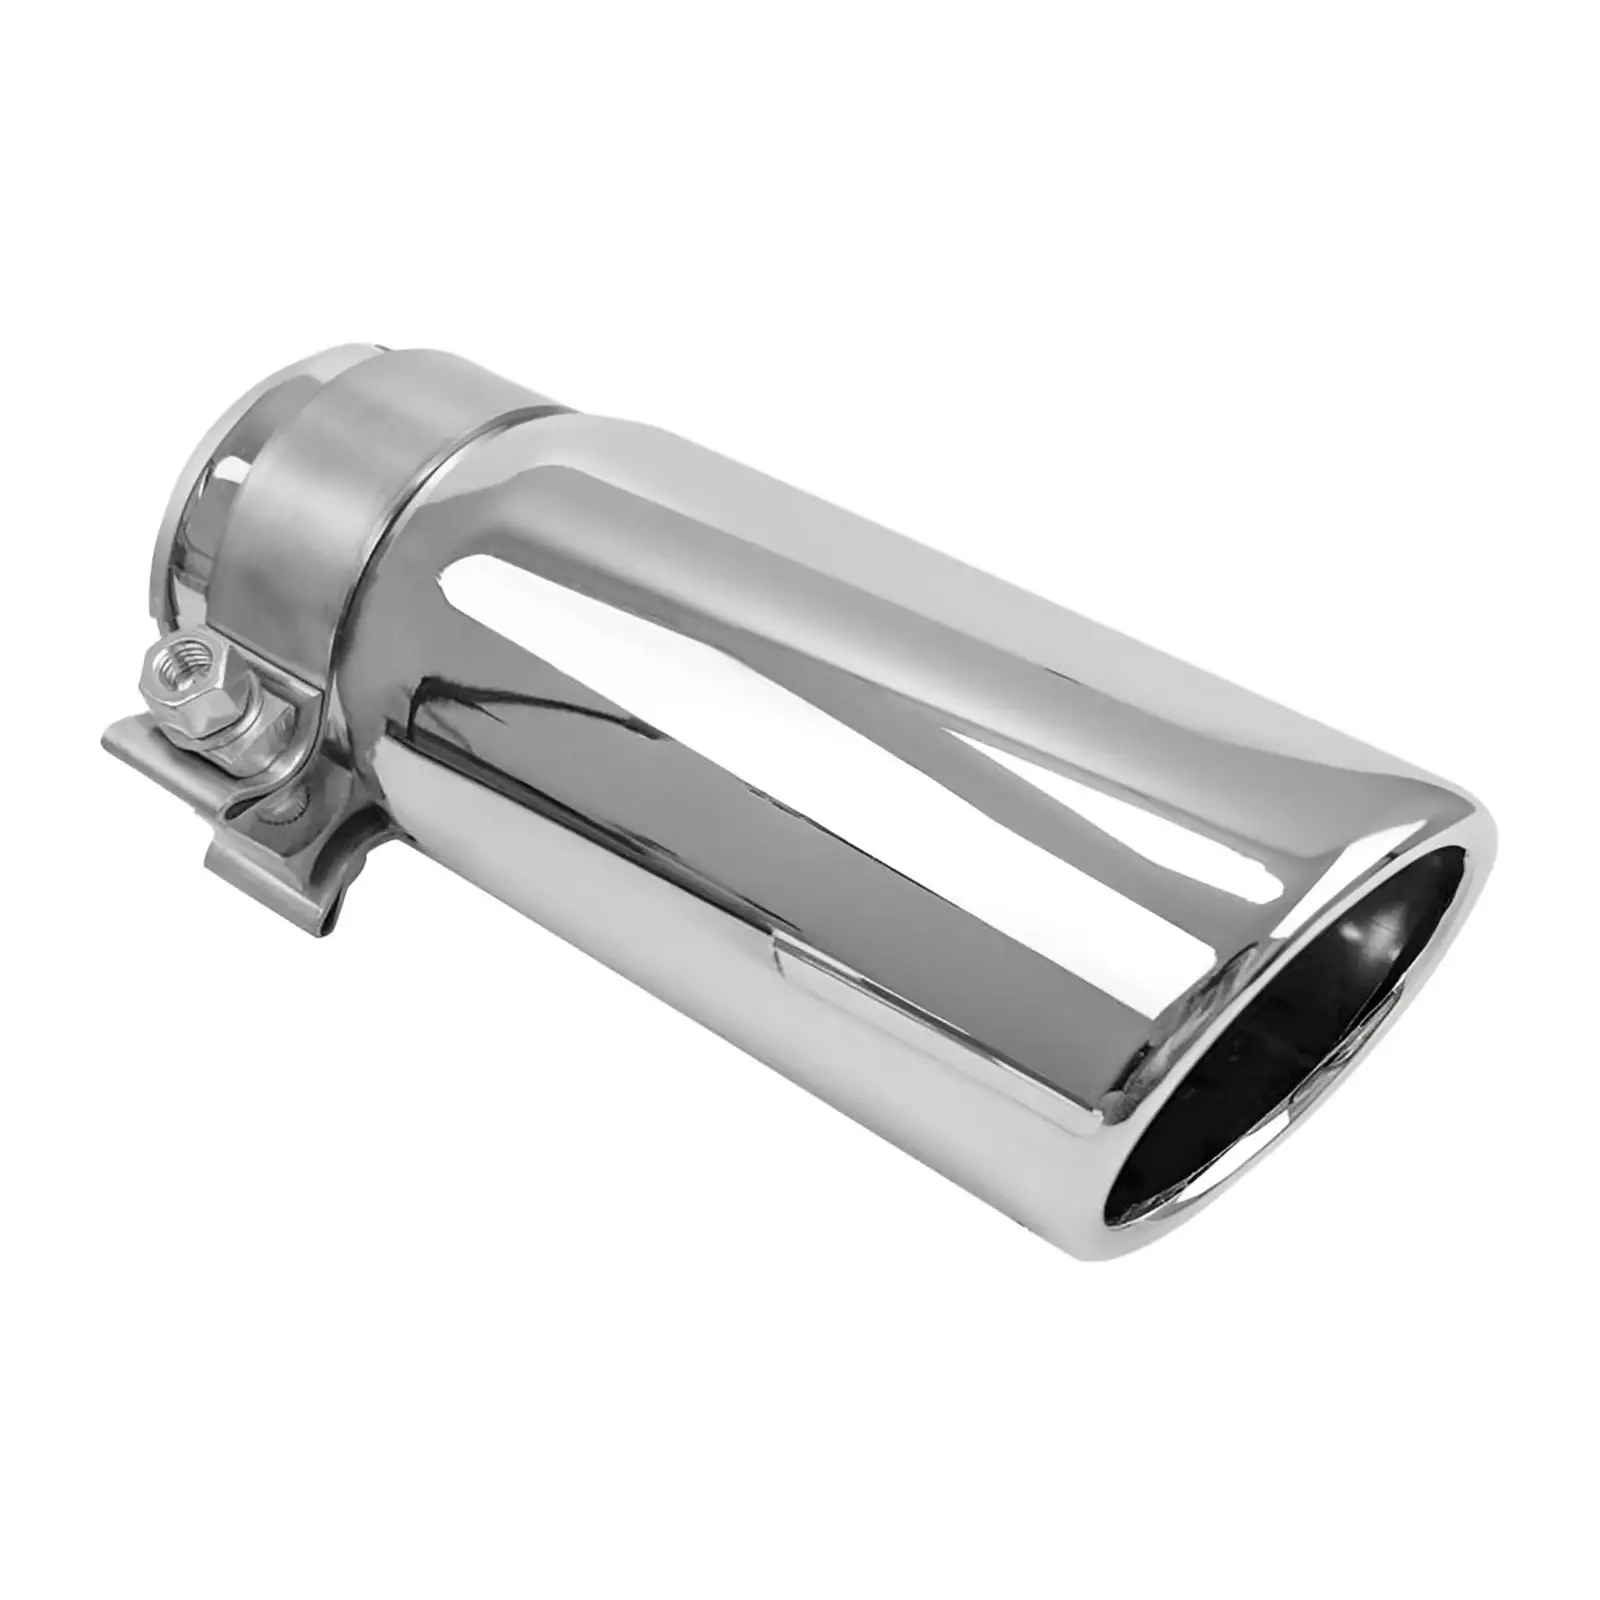 Stainless Steel Exhaust Tip PT932-35180-02 Exhaust  Tail Fit   2005 Direct Replaces Car Accessories Durable